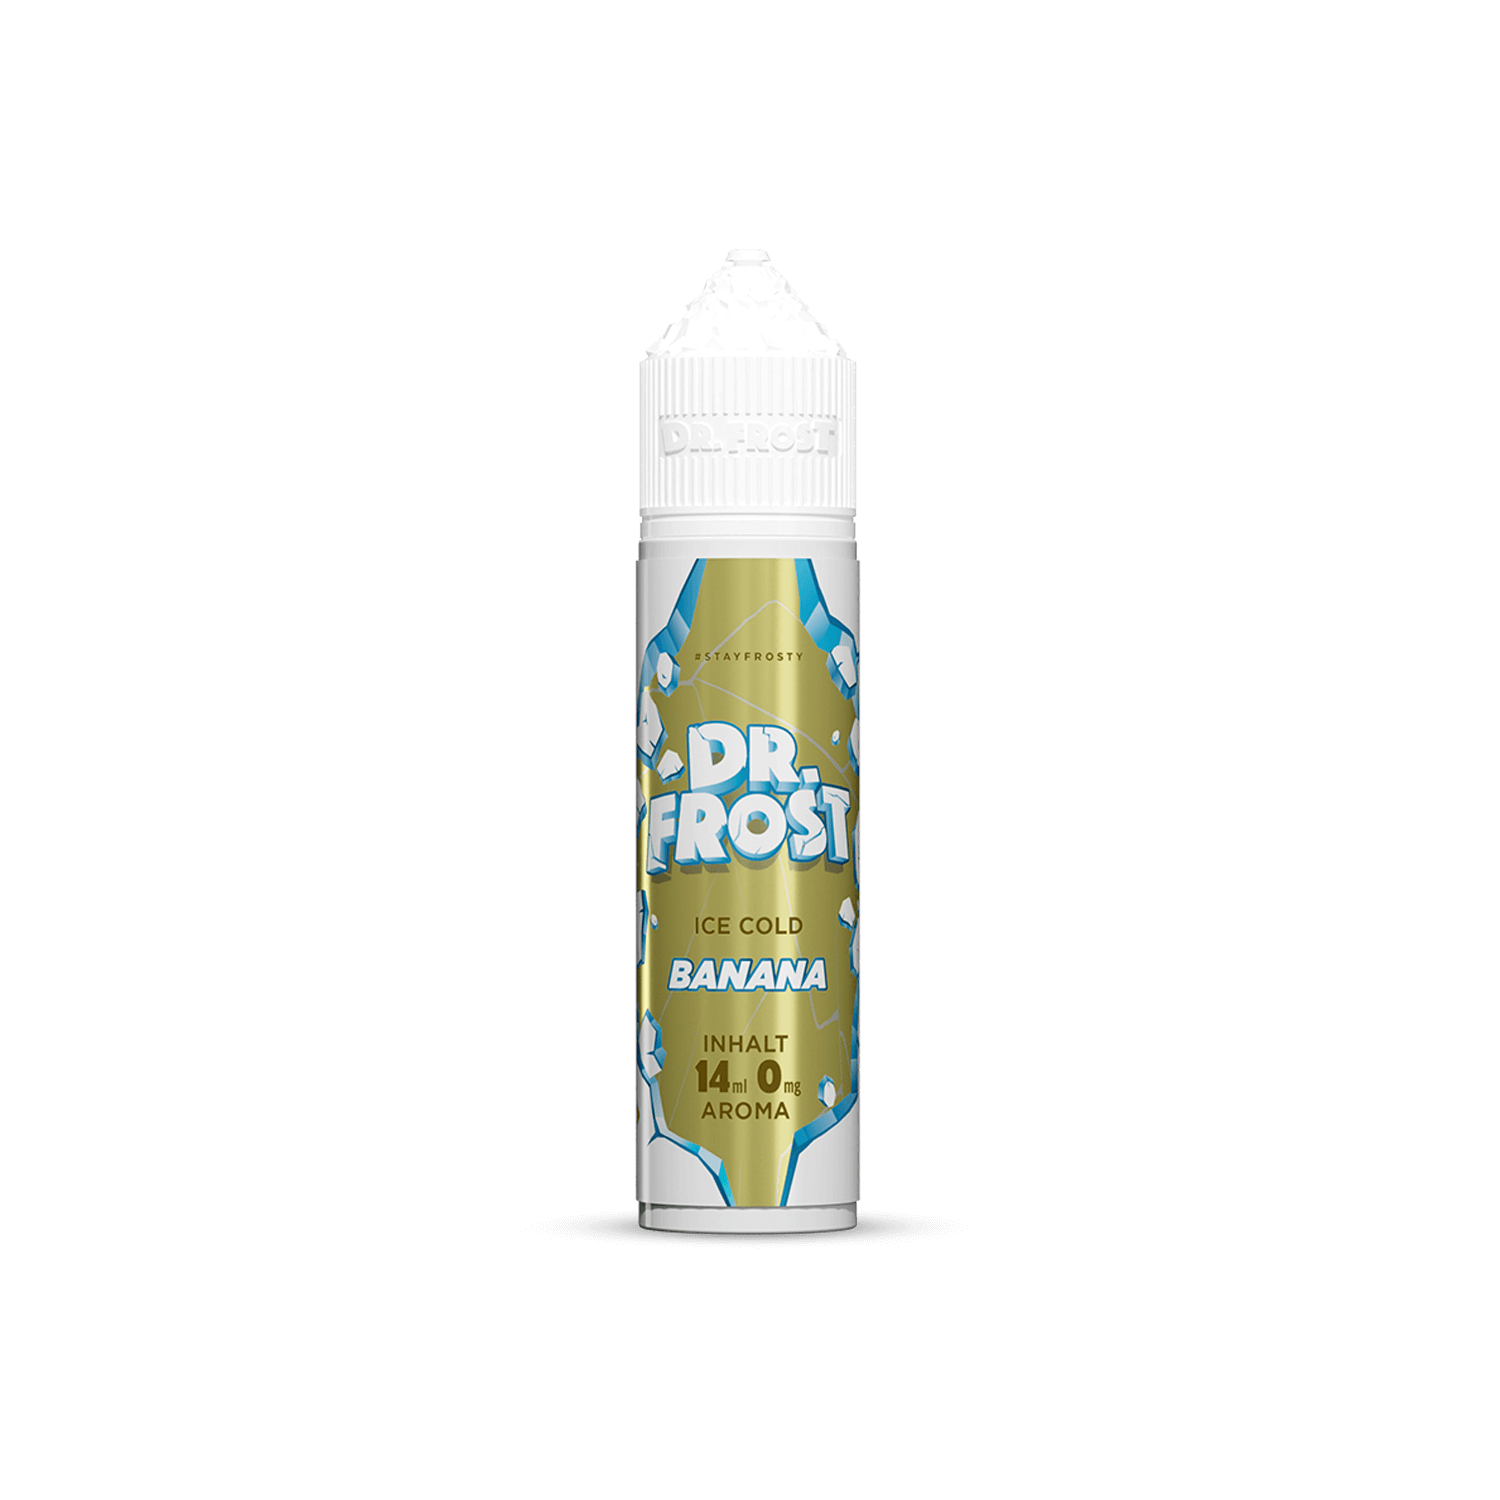 Dr. Frost - Ice Cold - Banana 14 ml Aroma